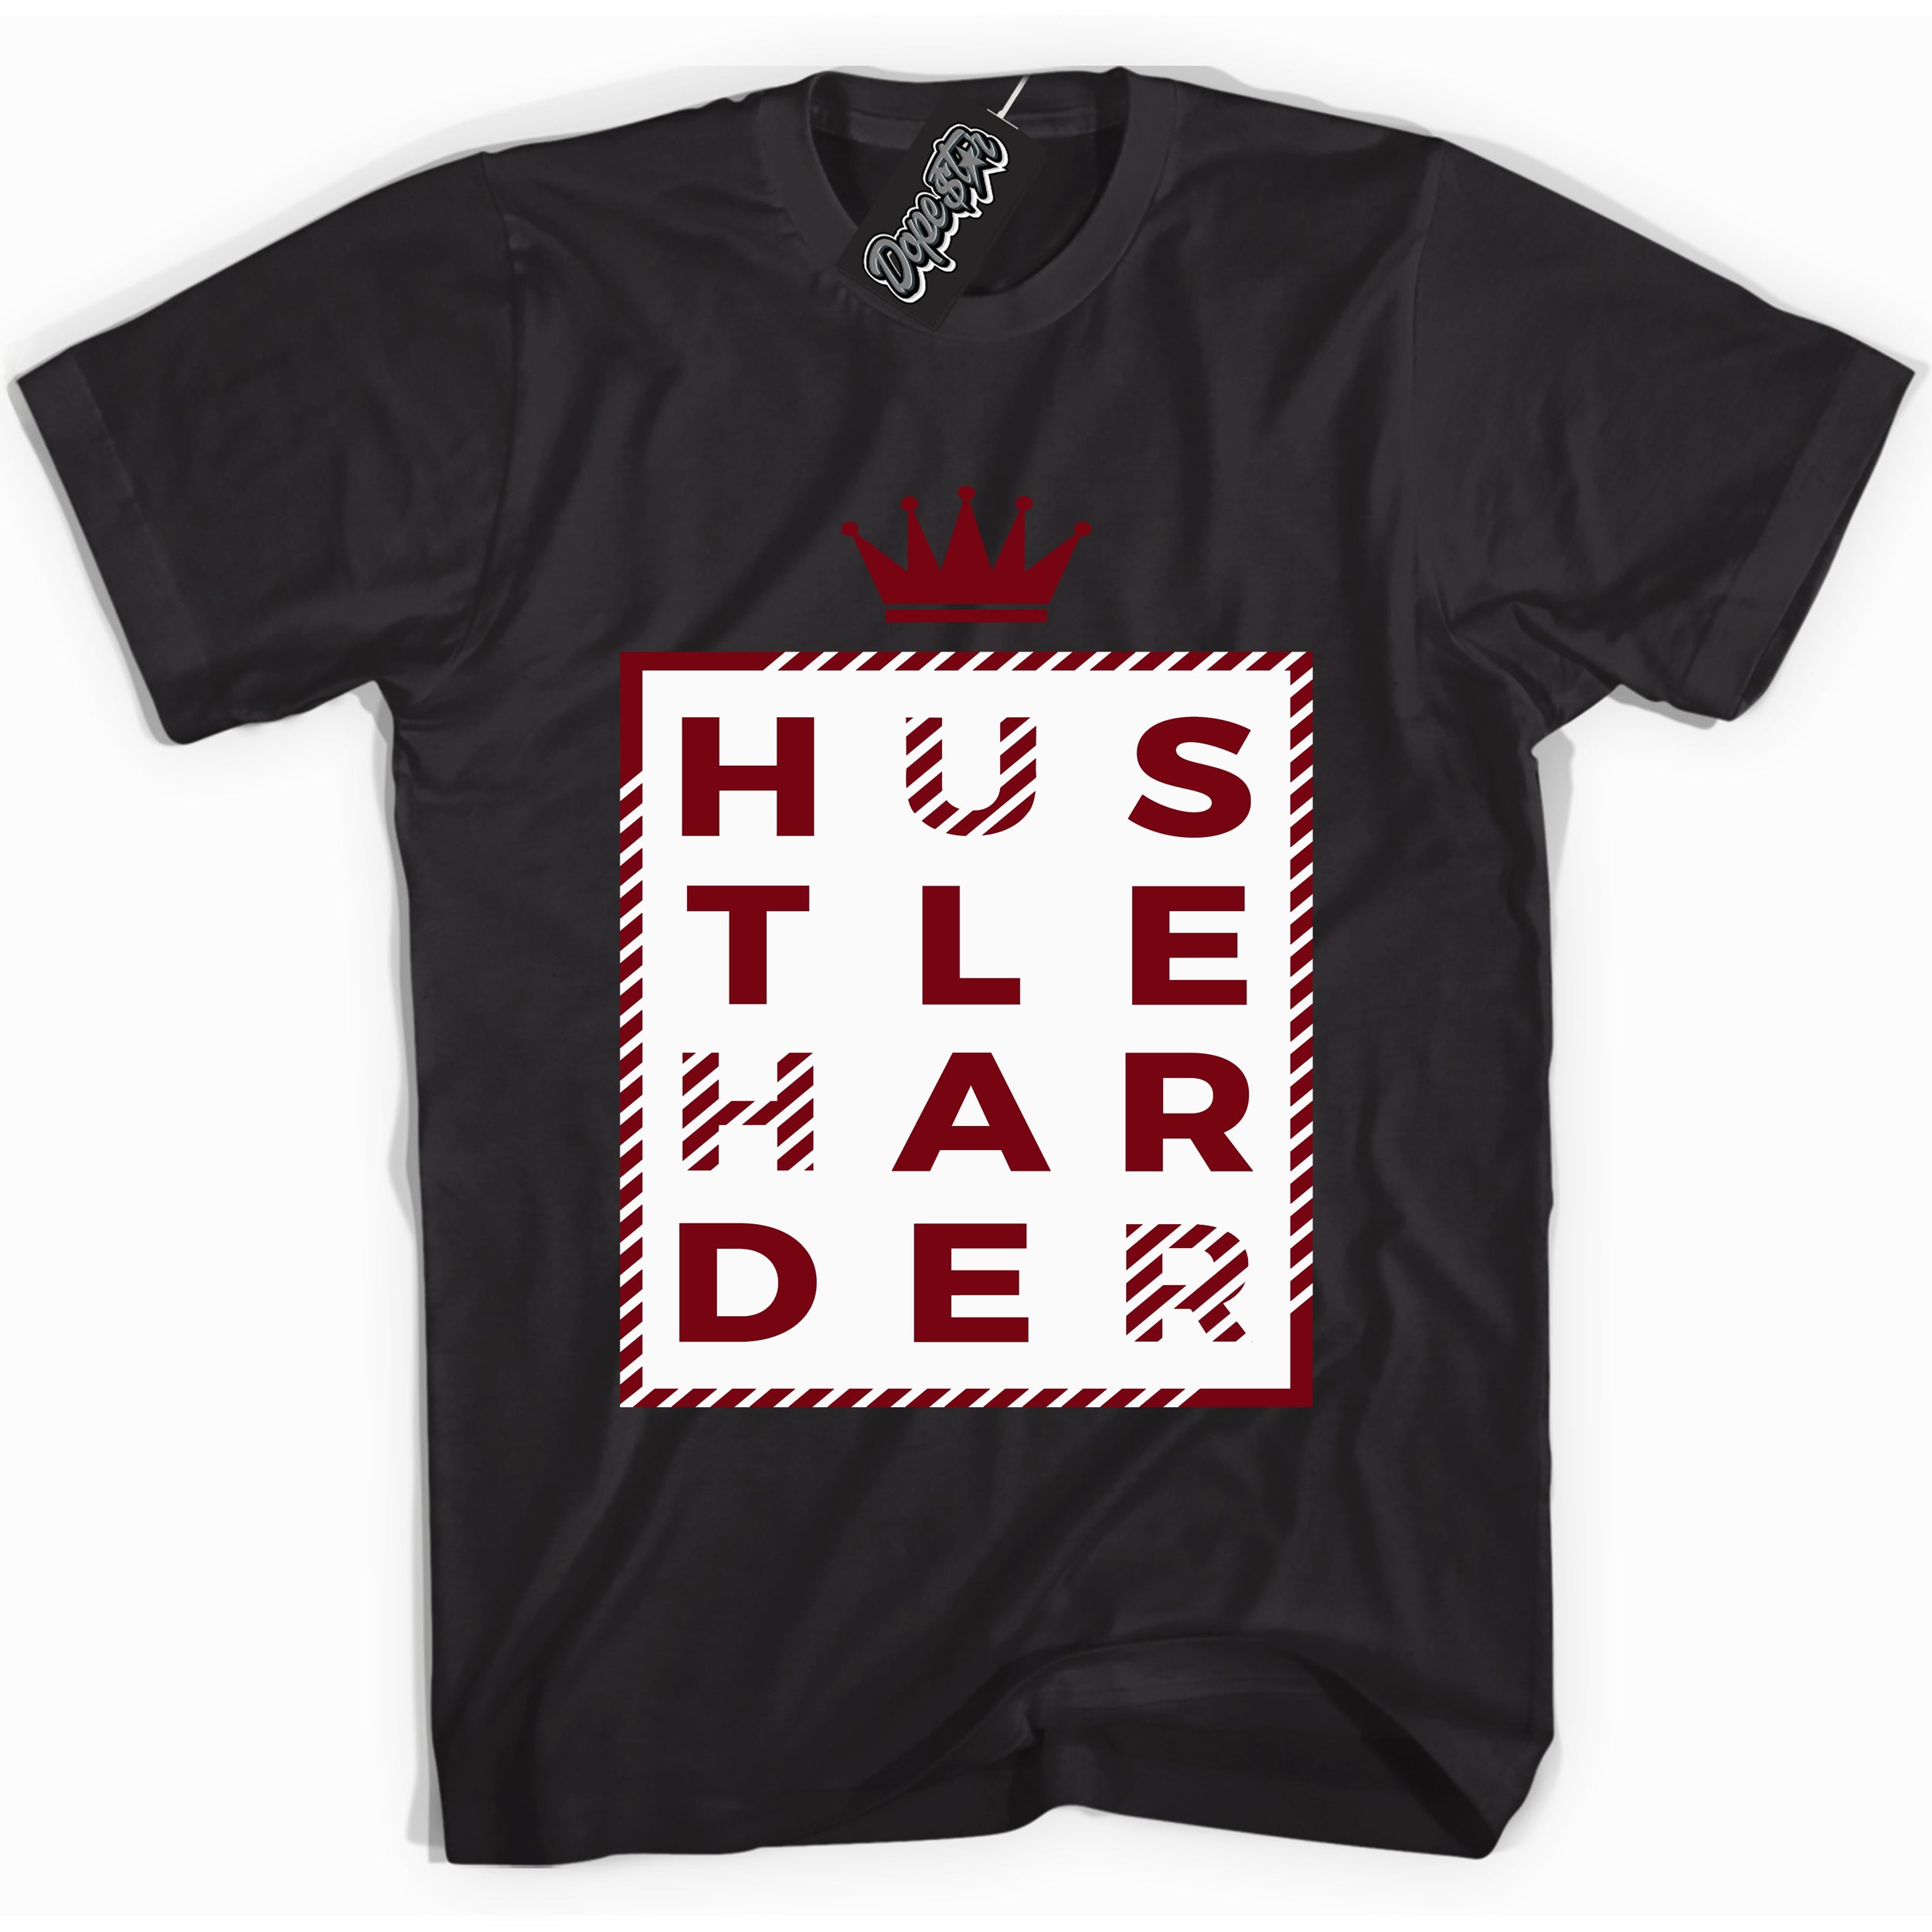 Cool Black graphic tee with “ Hustle Harder ” print, that perfectly matches OG Metallic Burgundy 1s sneakers 